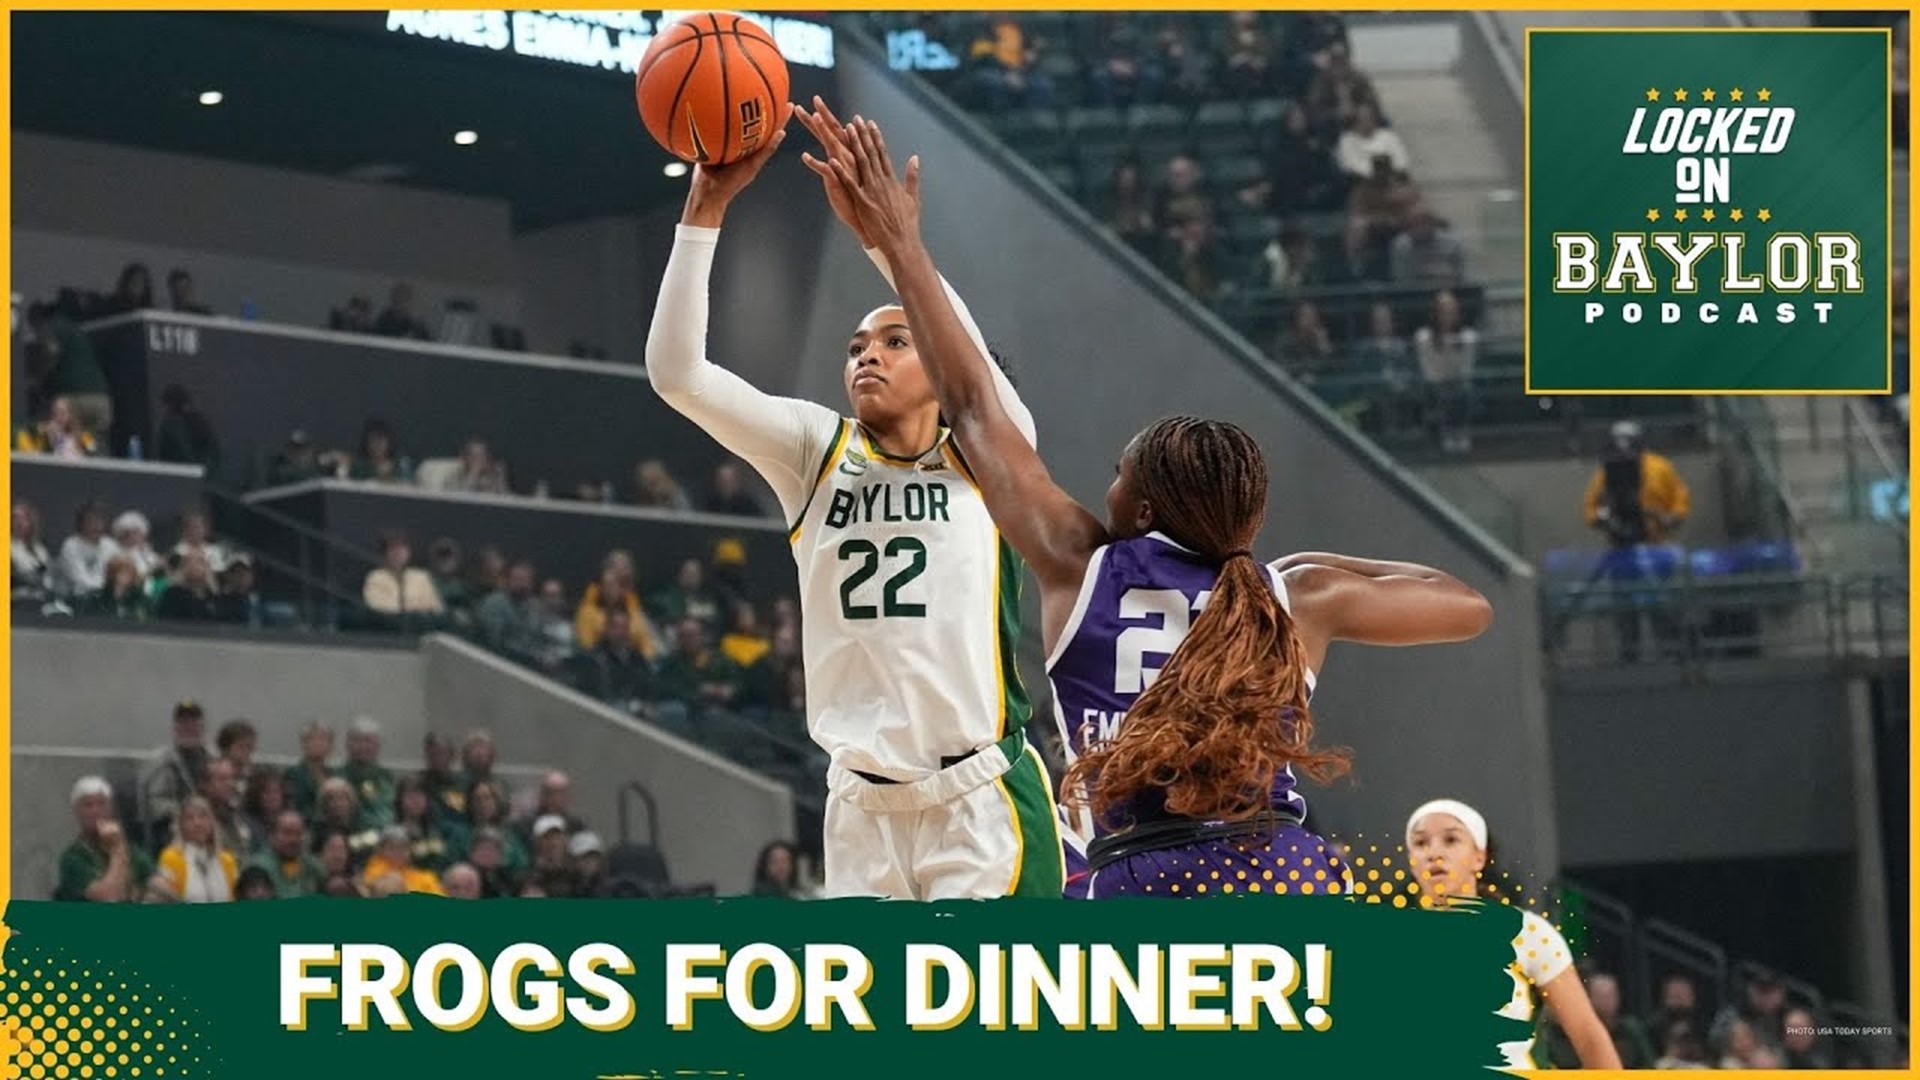 The Baylor Bears women's basketball team dispatched TCU for the 37th straight time in the rivalry and earned yet another top 25 win with the 71-50 thrashing